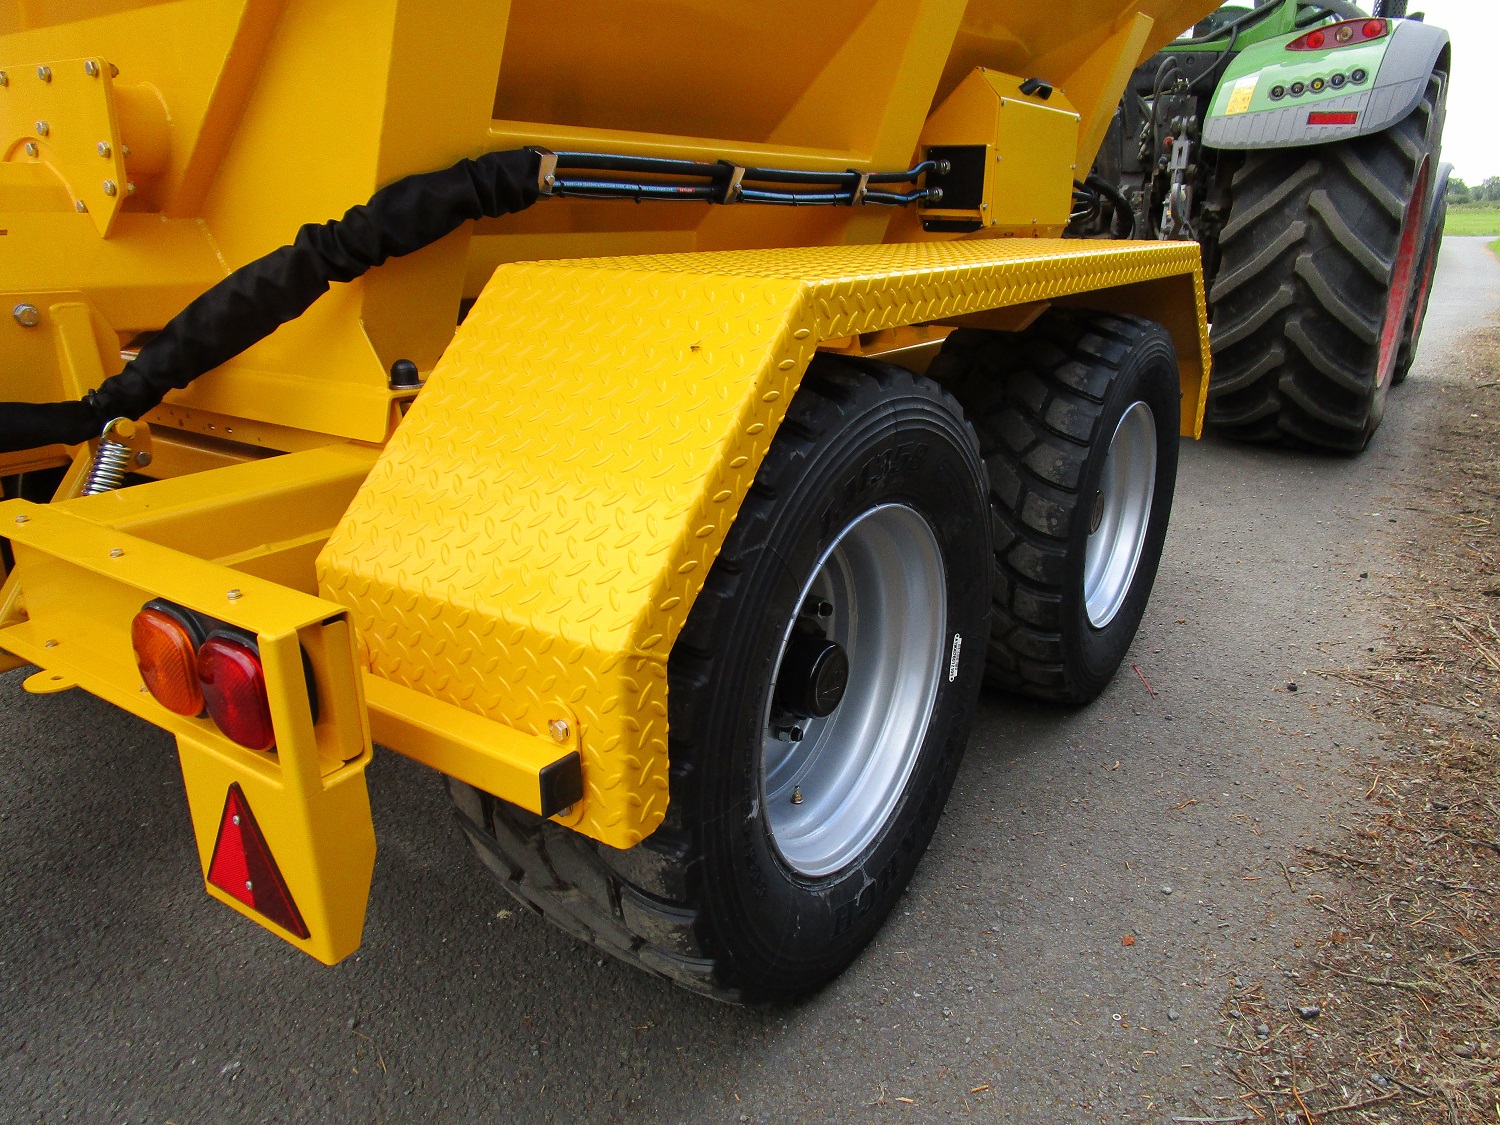 Tractor Towed Salt Spreader (Gritter) VALE TS6000 - High speed road going 8 stud wheels and wide pattern tyres